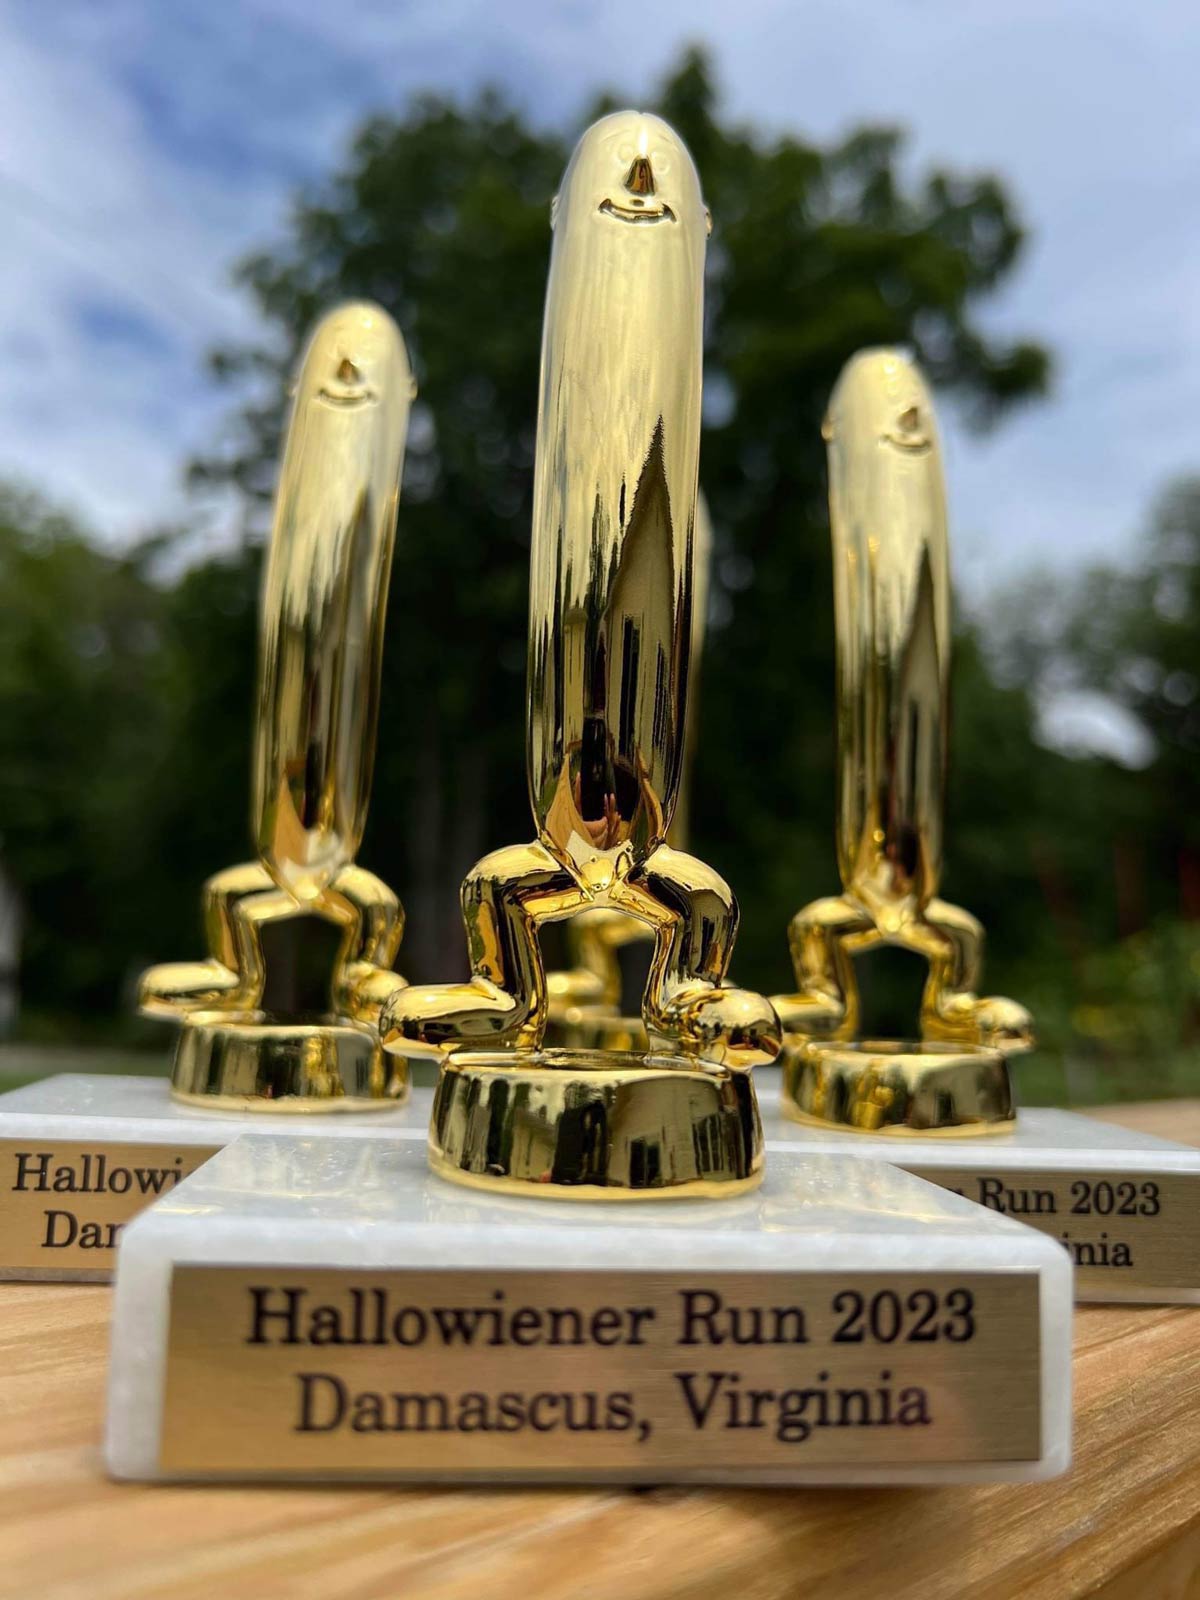 Damascus VA is having a Halloween Run / Wiener Roast and these are the trophies...